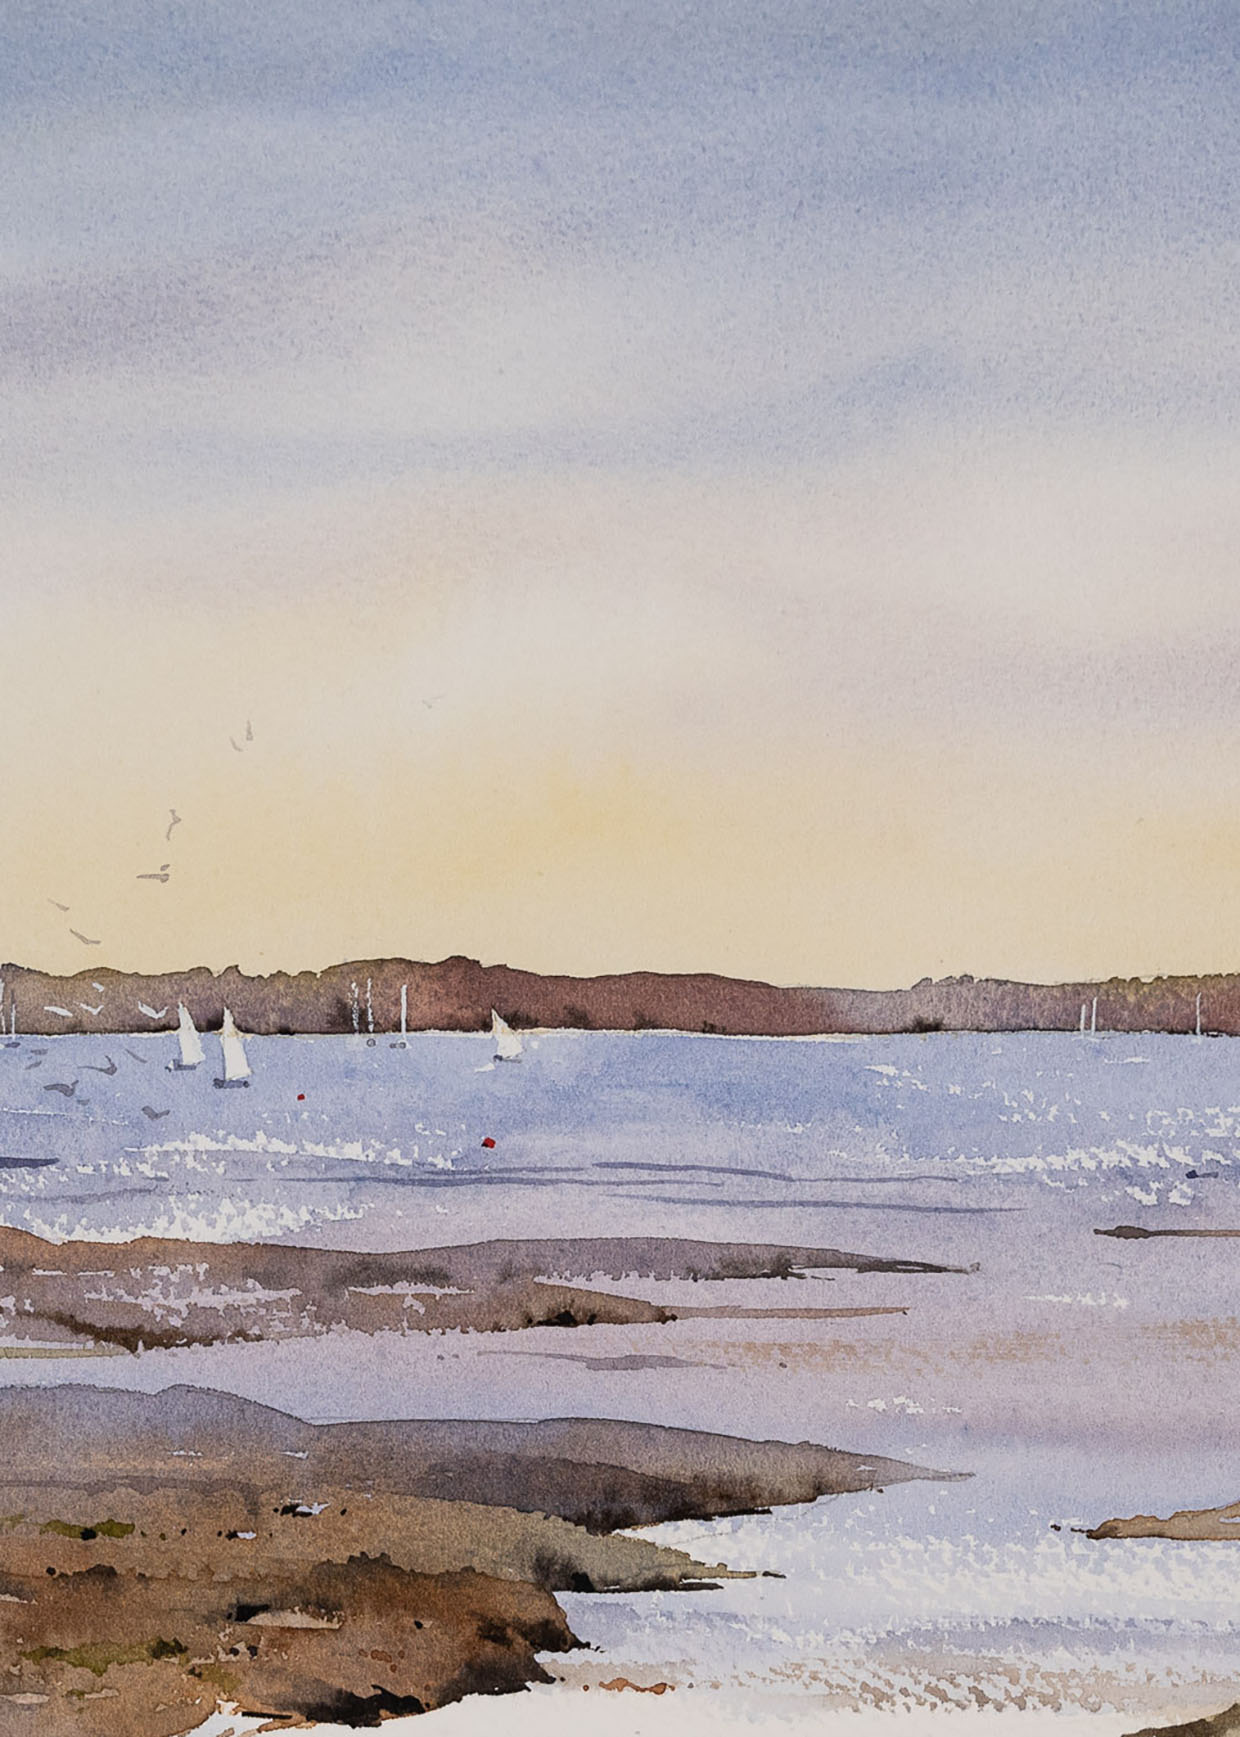 A section of Oliver Pyle’s painting of Poole Harbour in Dorset